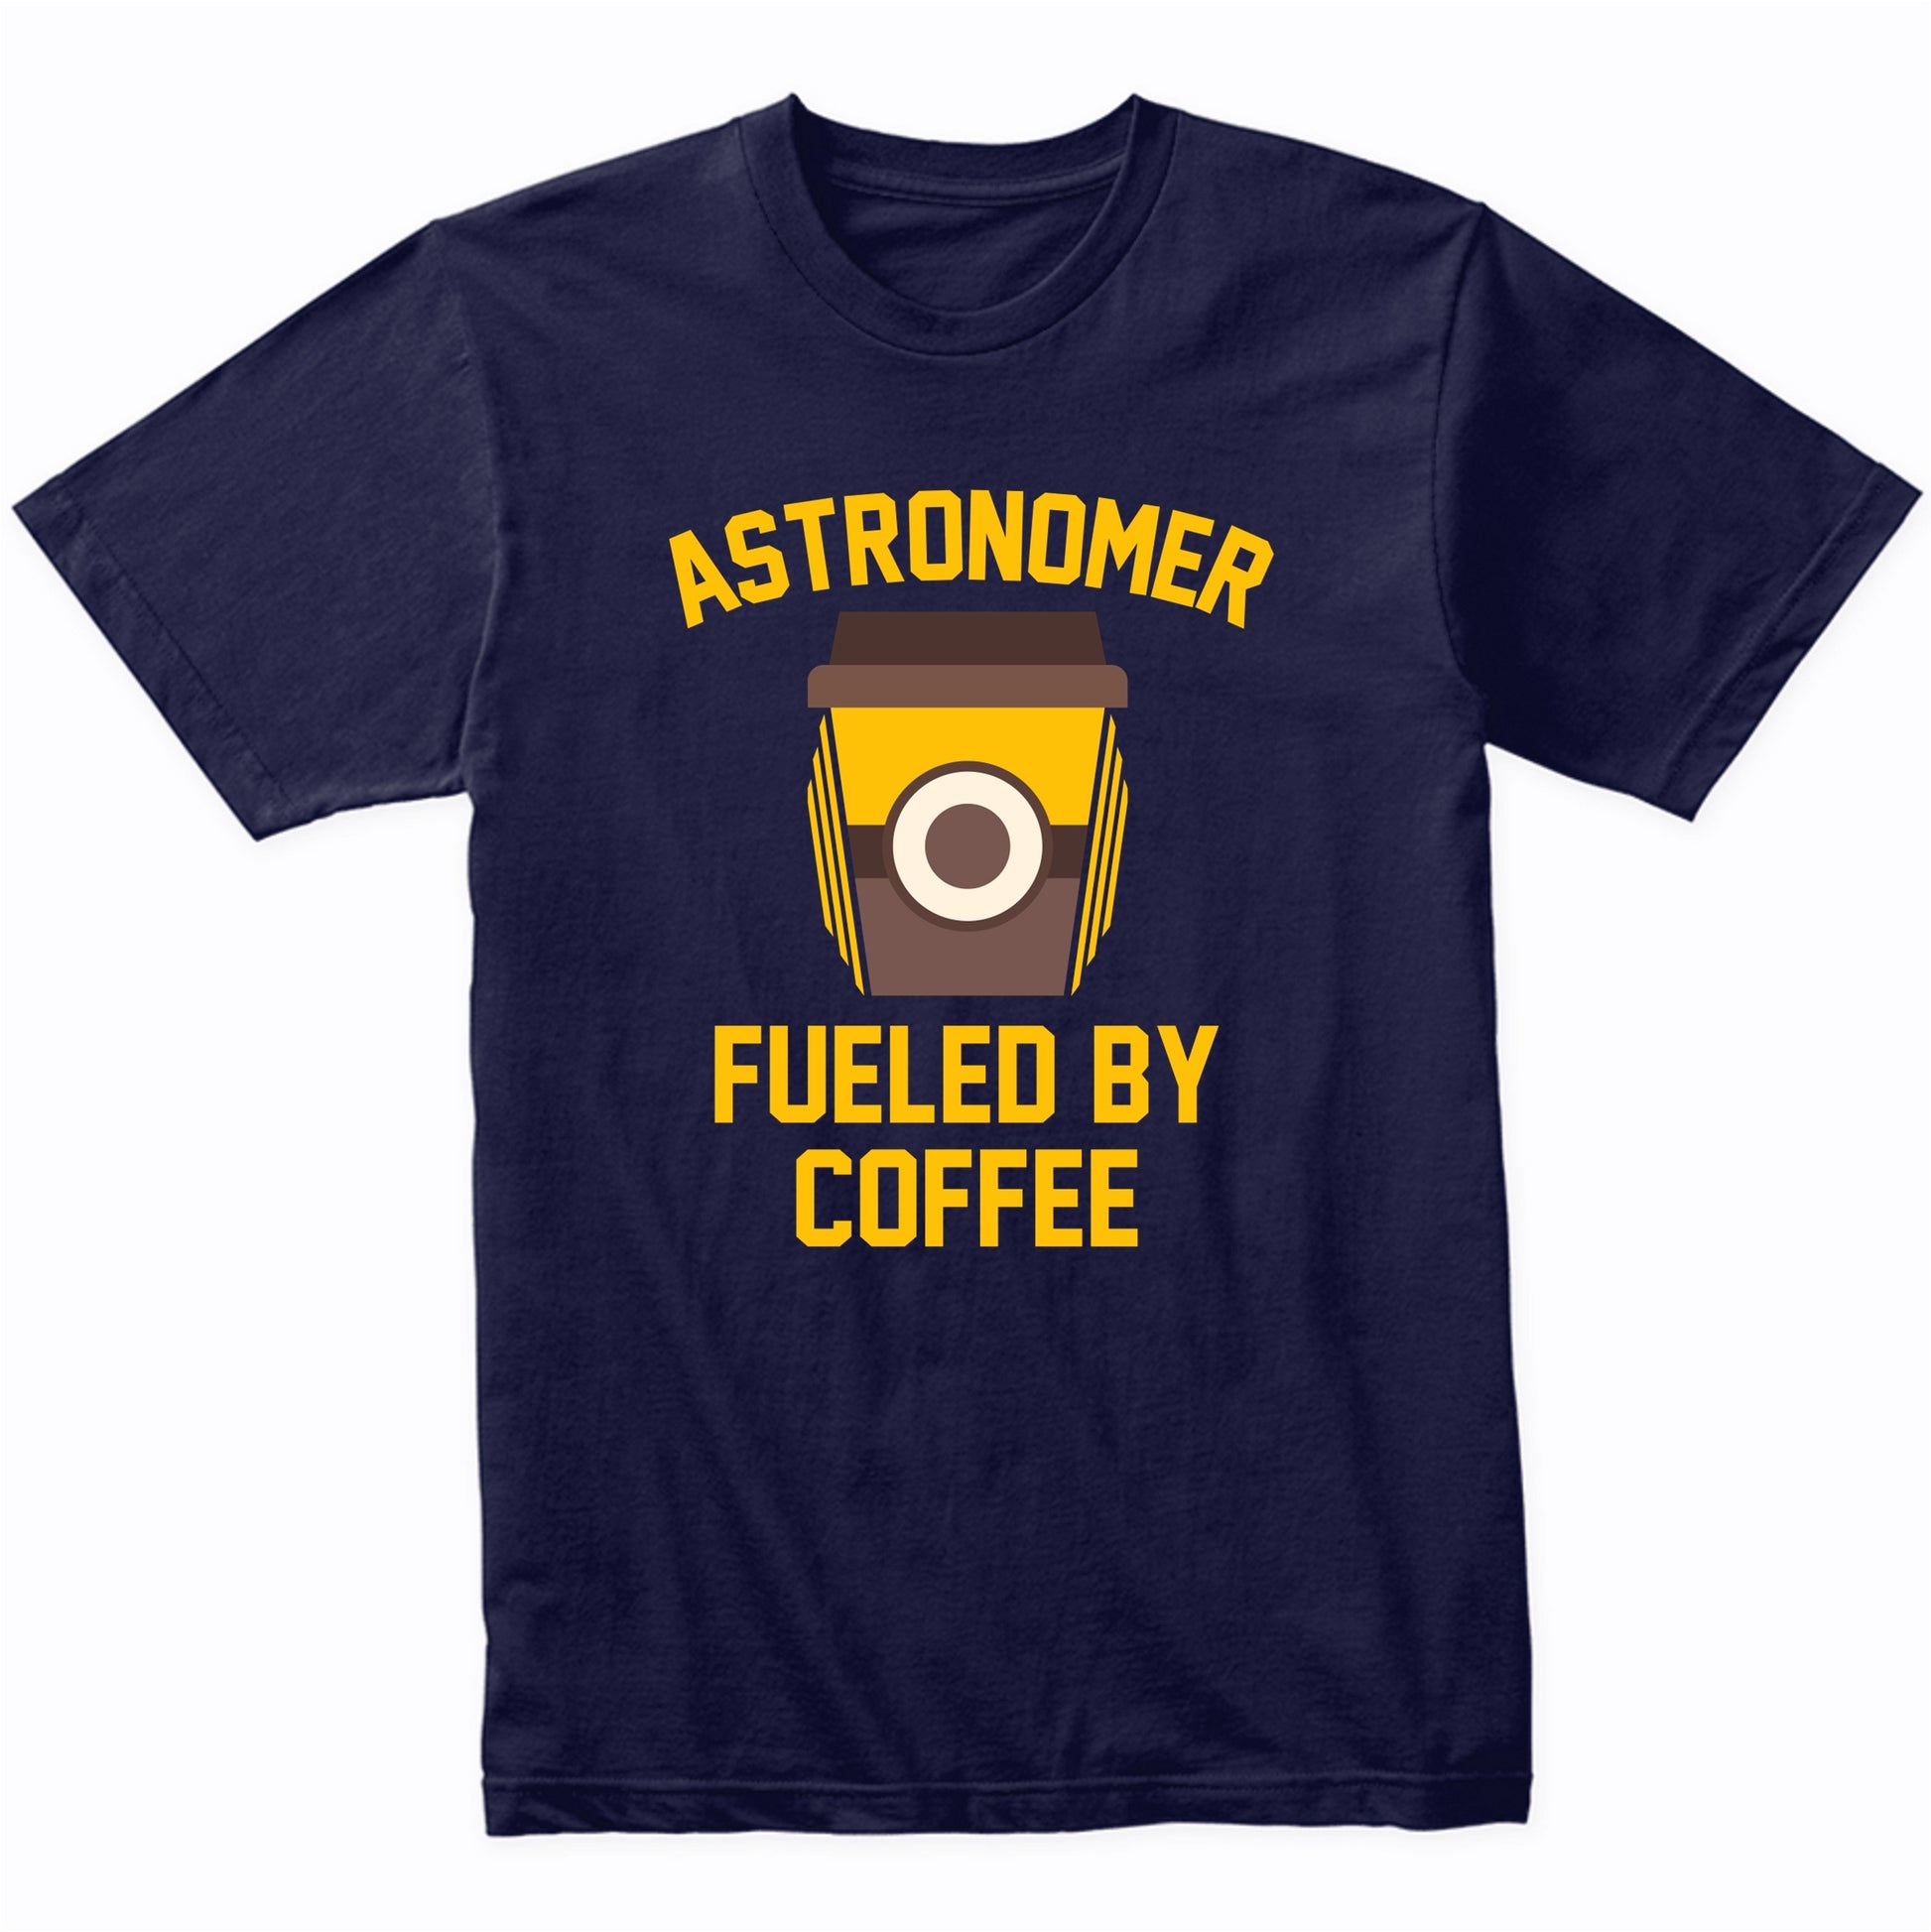 Astronomer Fueled By Coffee Funny Astronomy Shirt